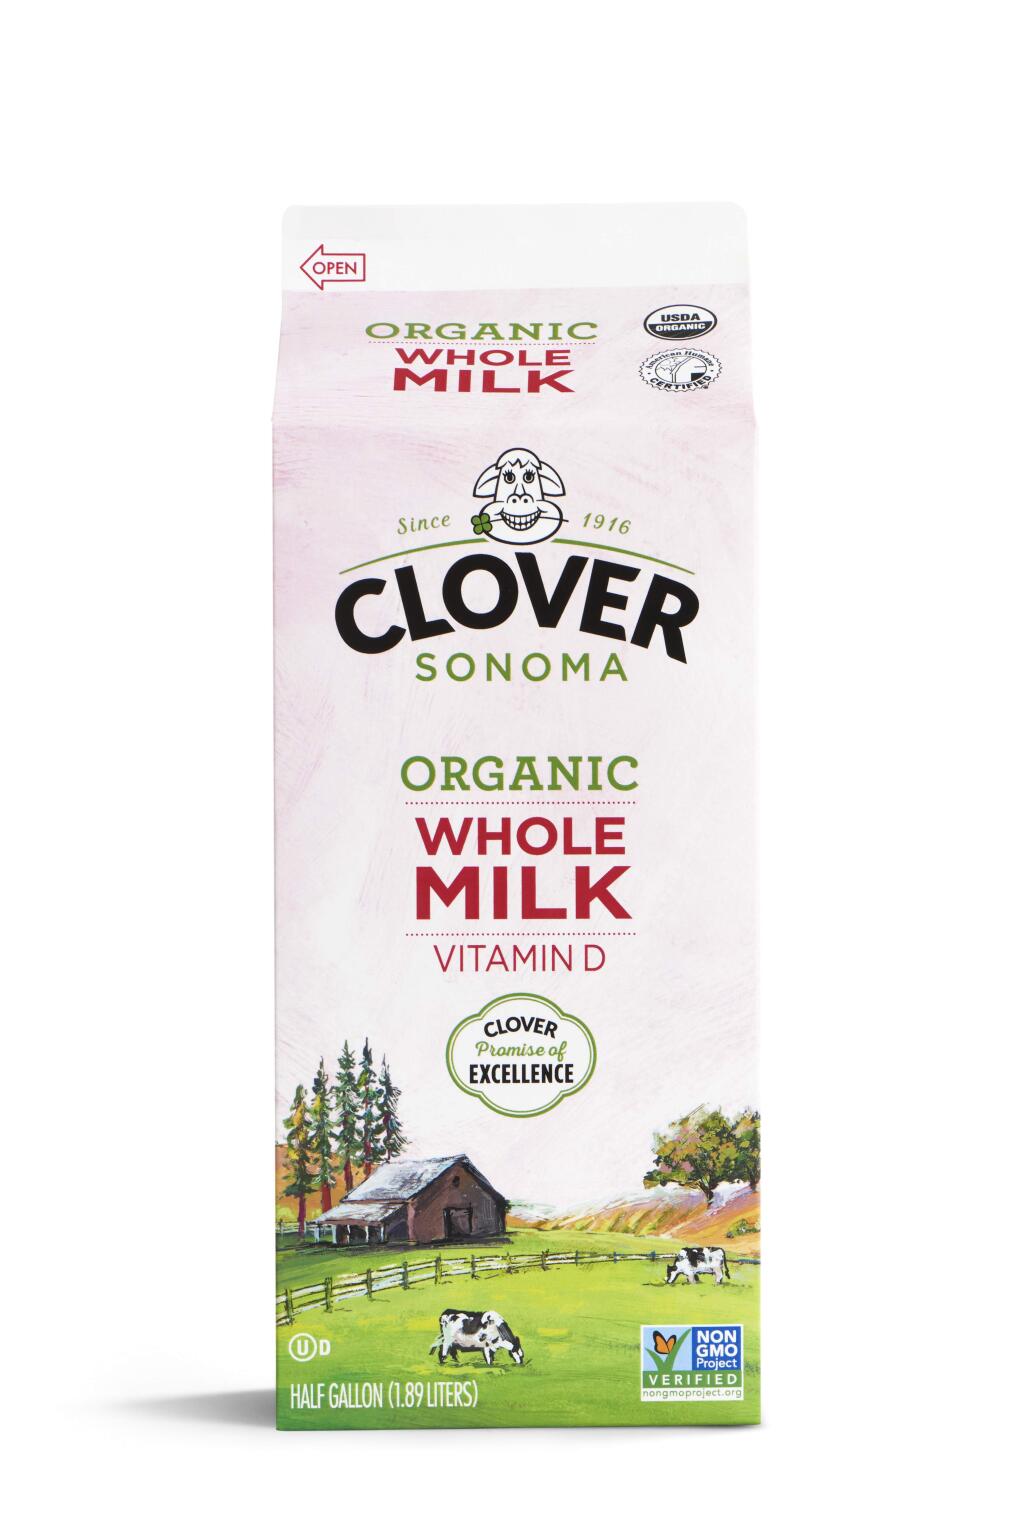 Clover Sonoma plans to change the liner of its organic milk cartons. (Courtesy Photo)